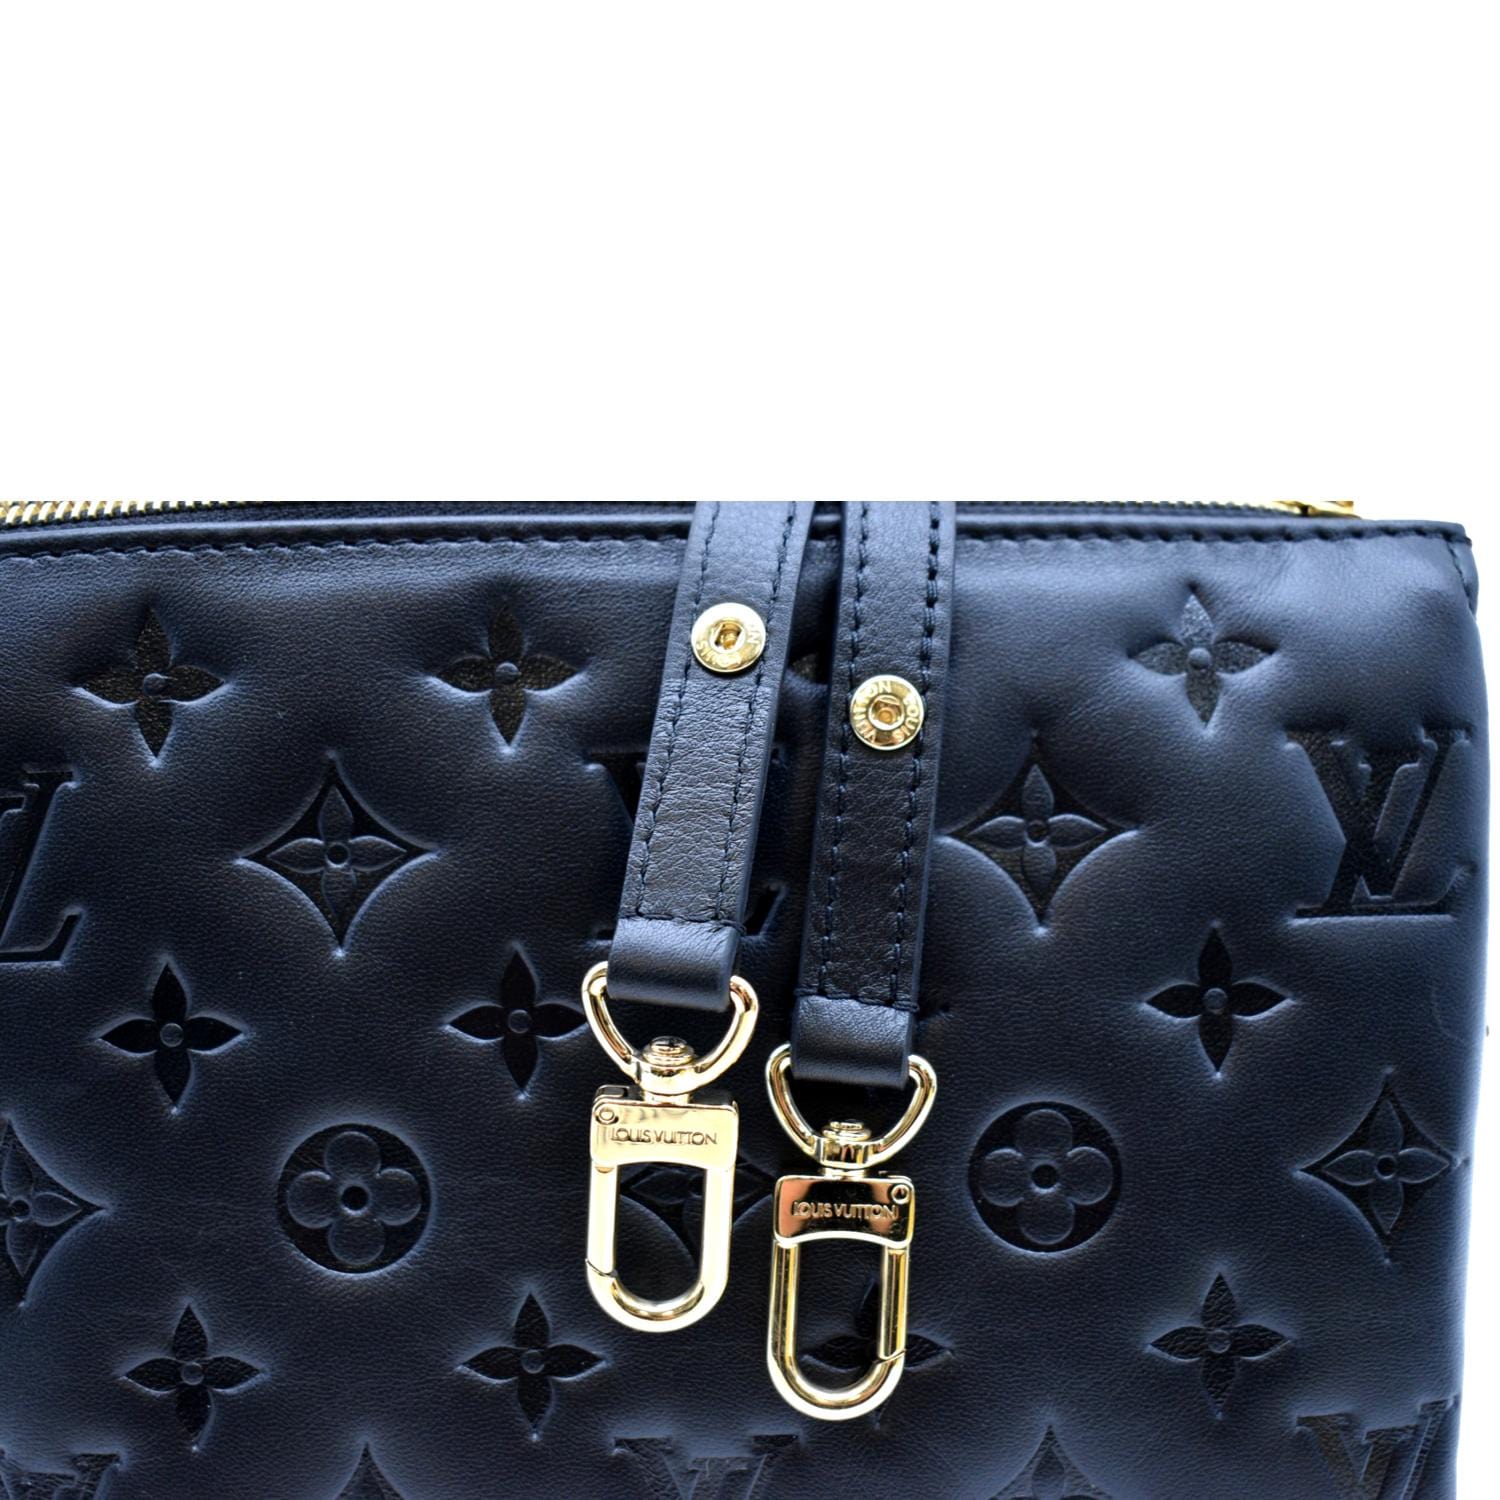 LOUIS VUITTON COUSSIN BB FIRST IMPRESSIONS! 